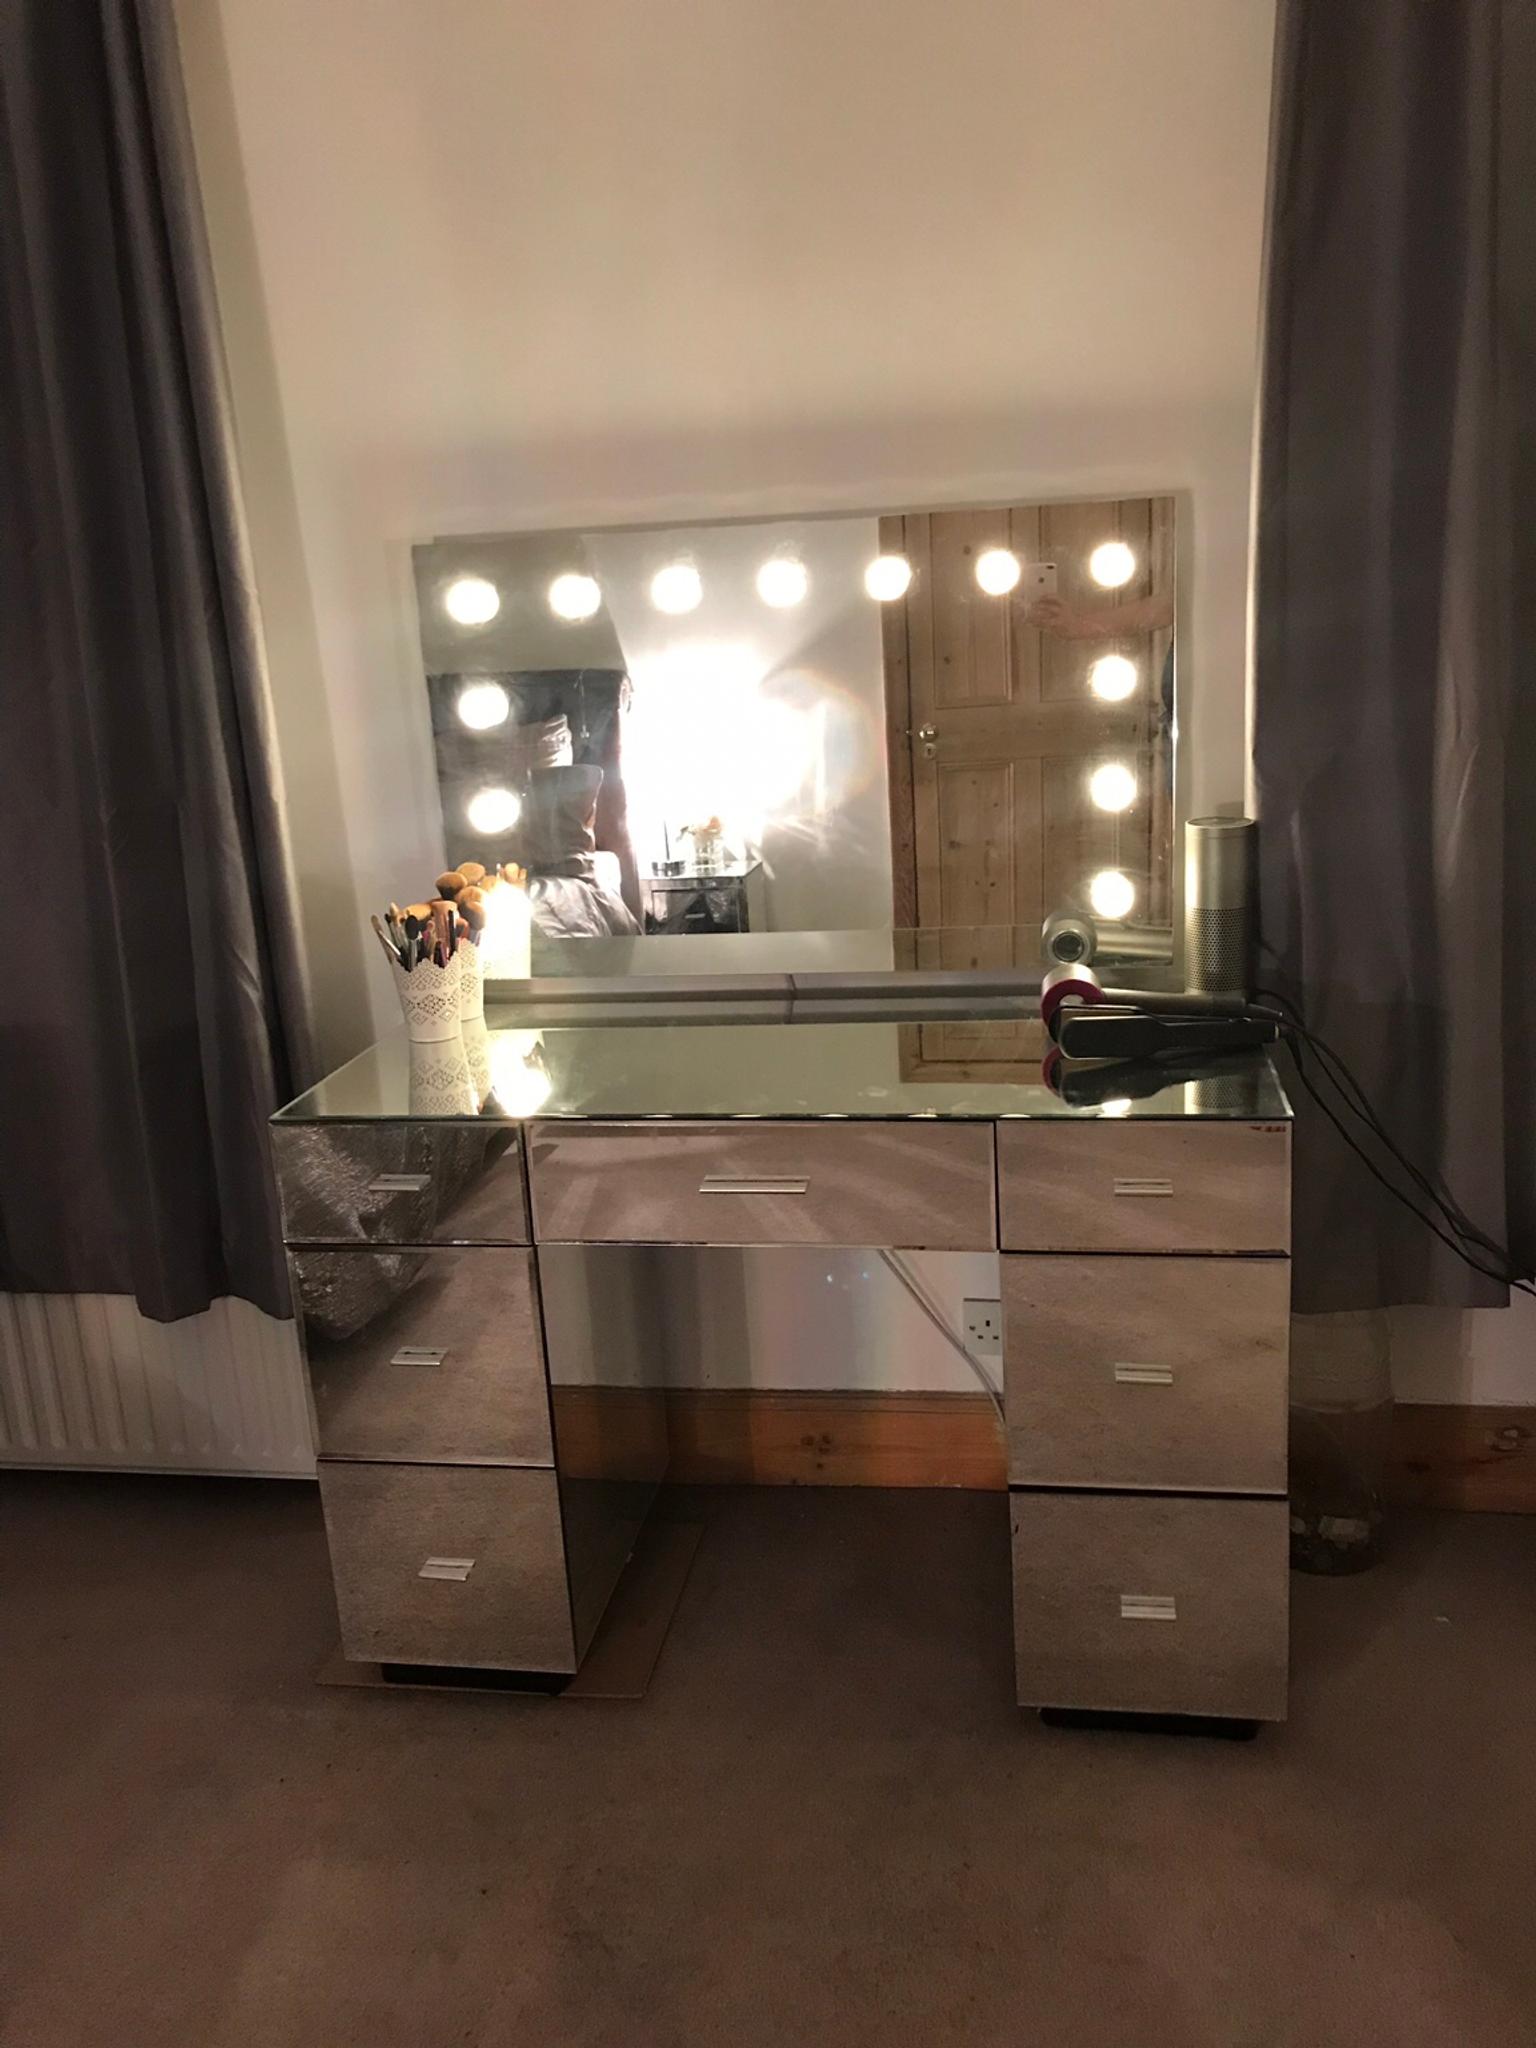 Dunelm Mirrored Dressing Table In Mk16 Pagnell Fur 325 00 Zum